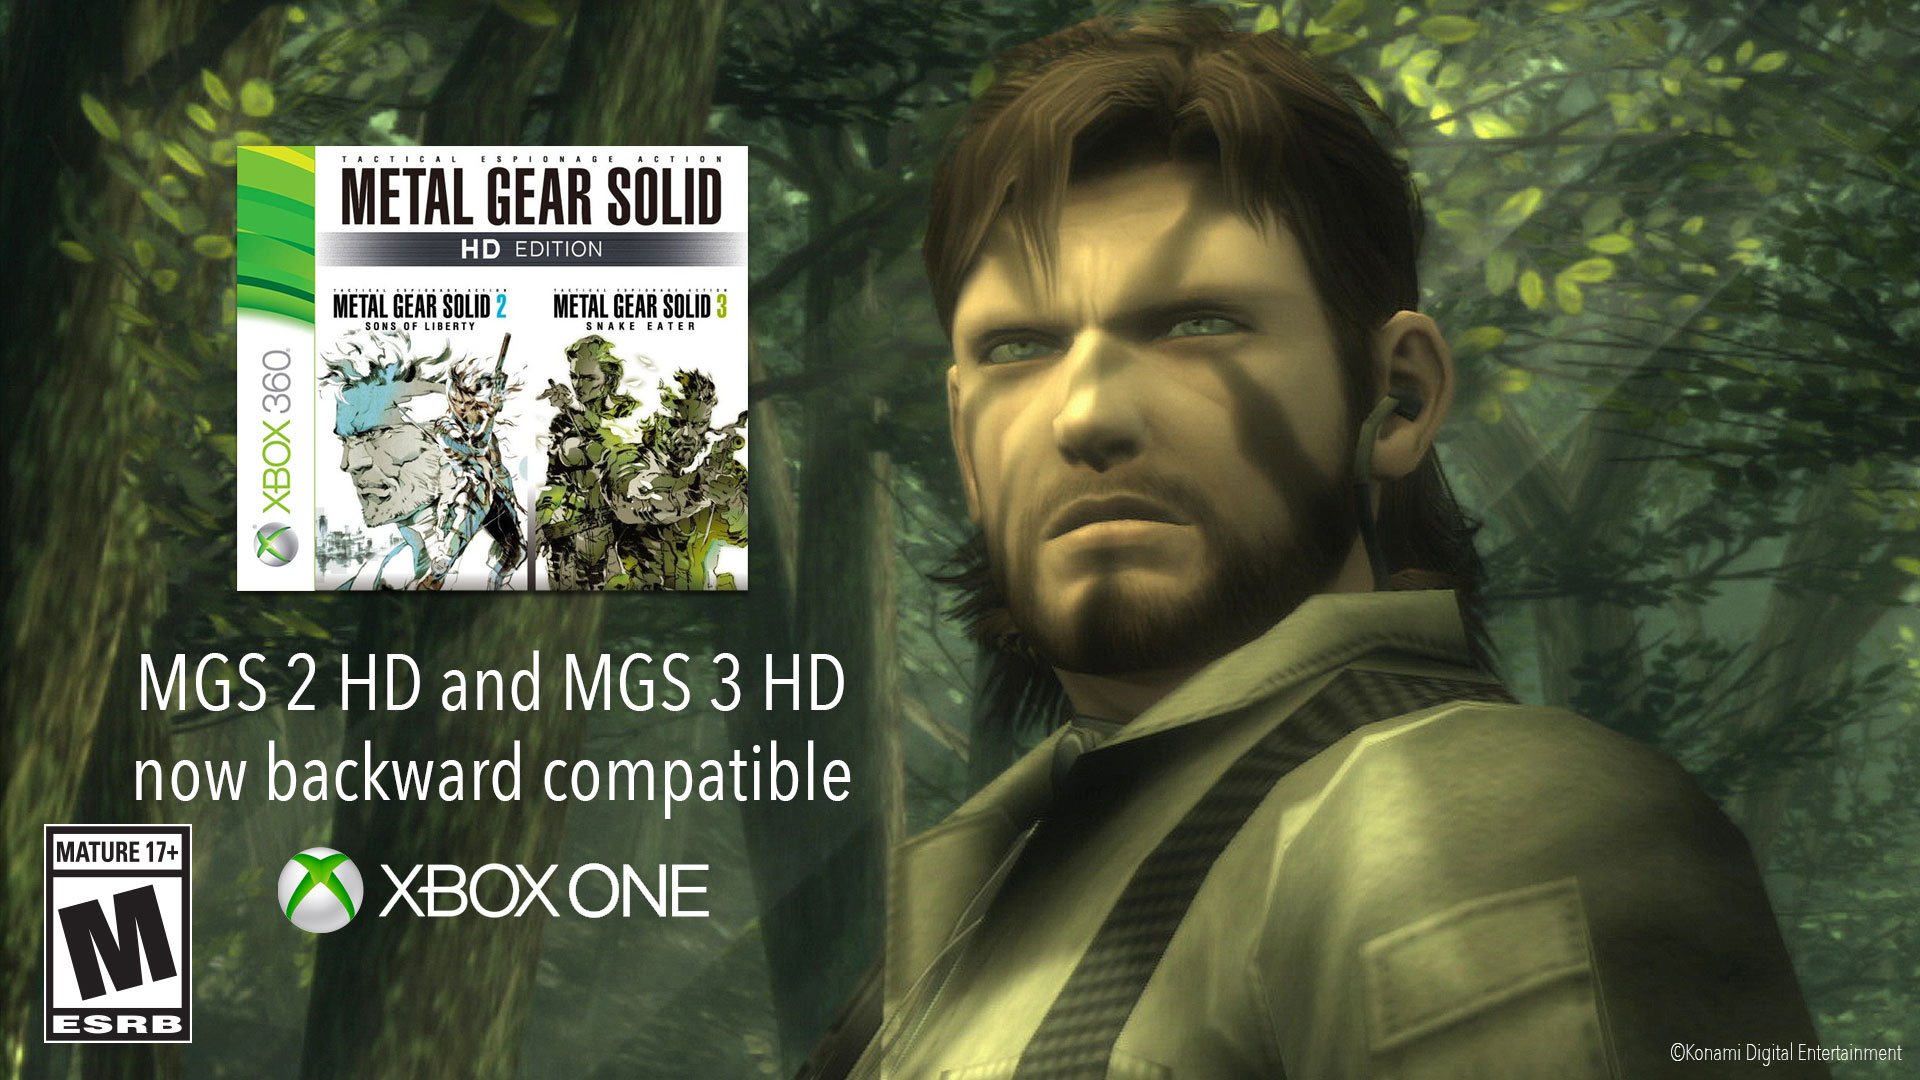 Mgs 3 master collection. Metal Gear Xbox 360. Metal Gear Solid 3 Xbox 360.